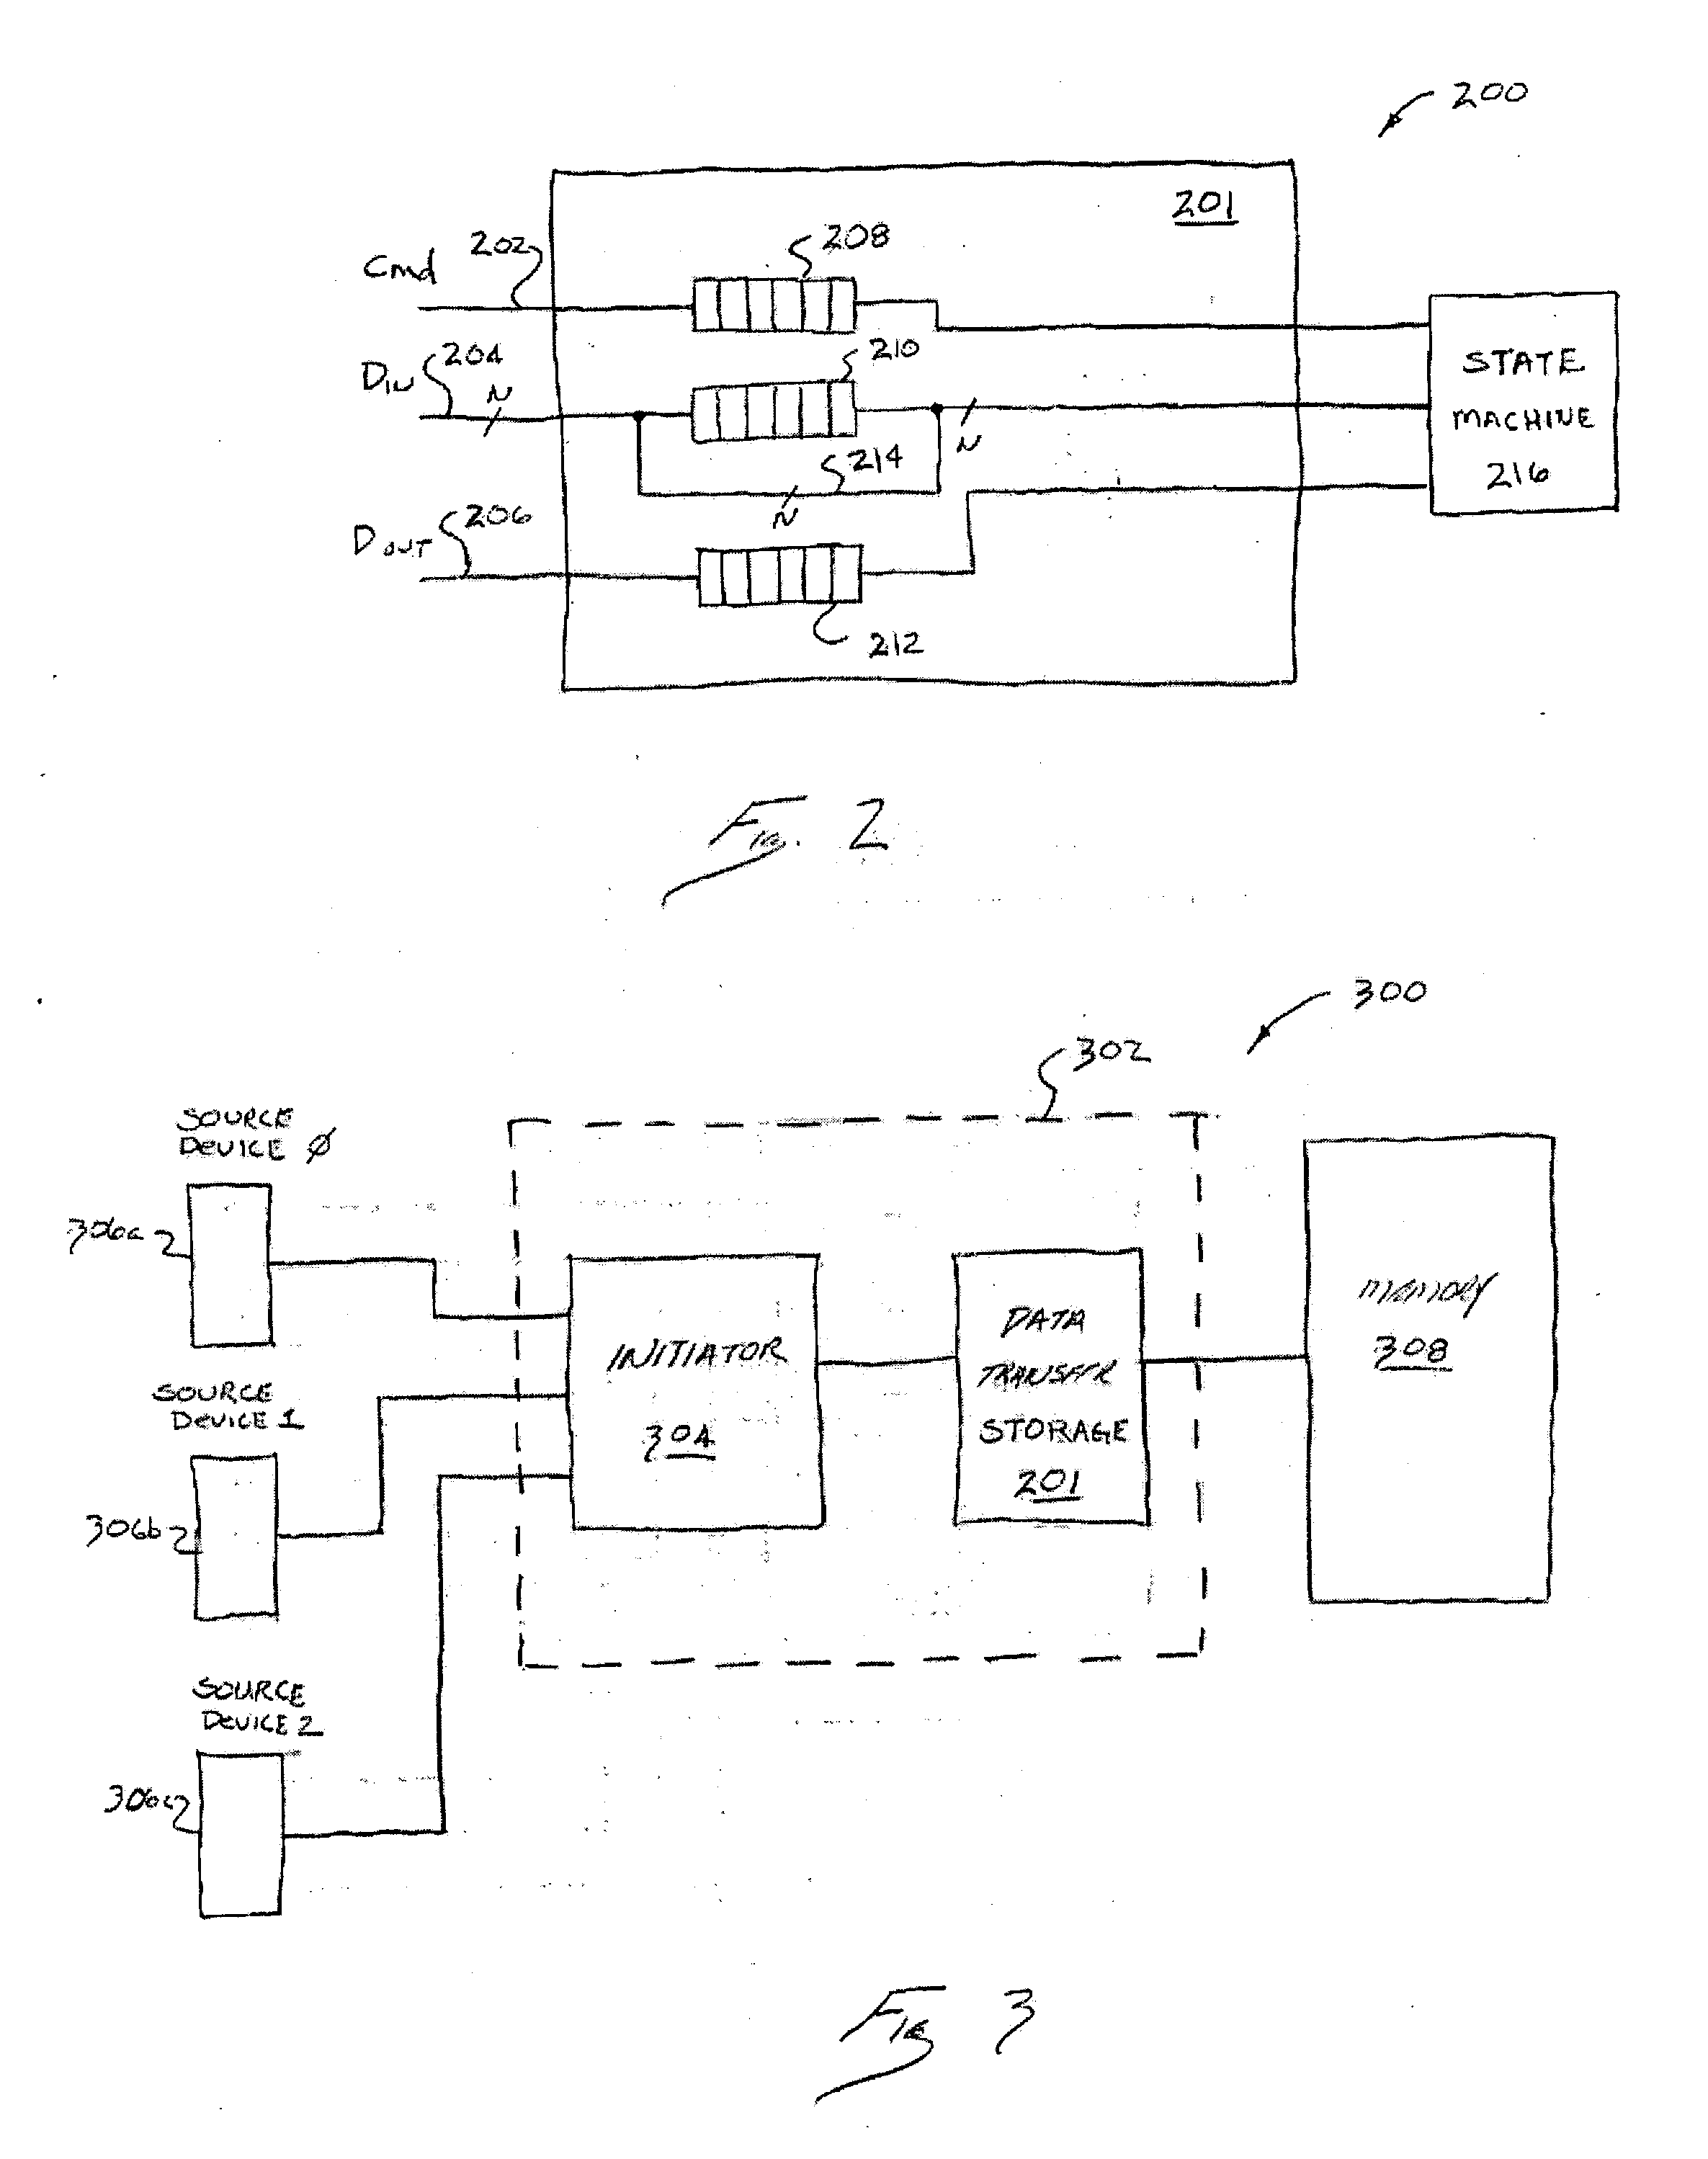 Port independent data transaction interface for multi-port devices